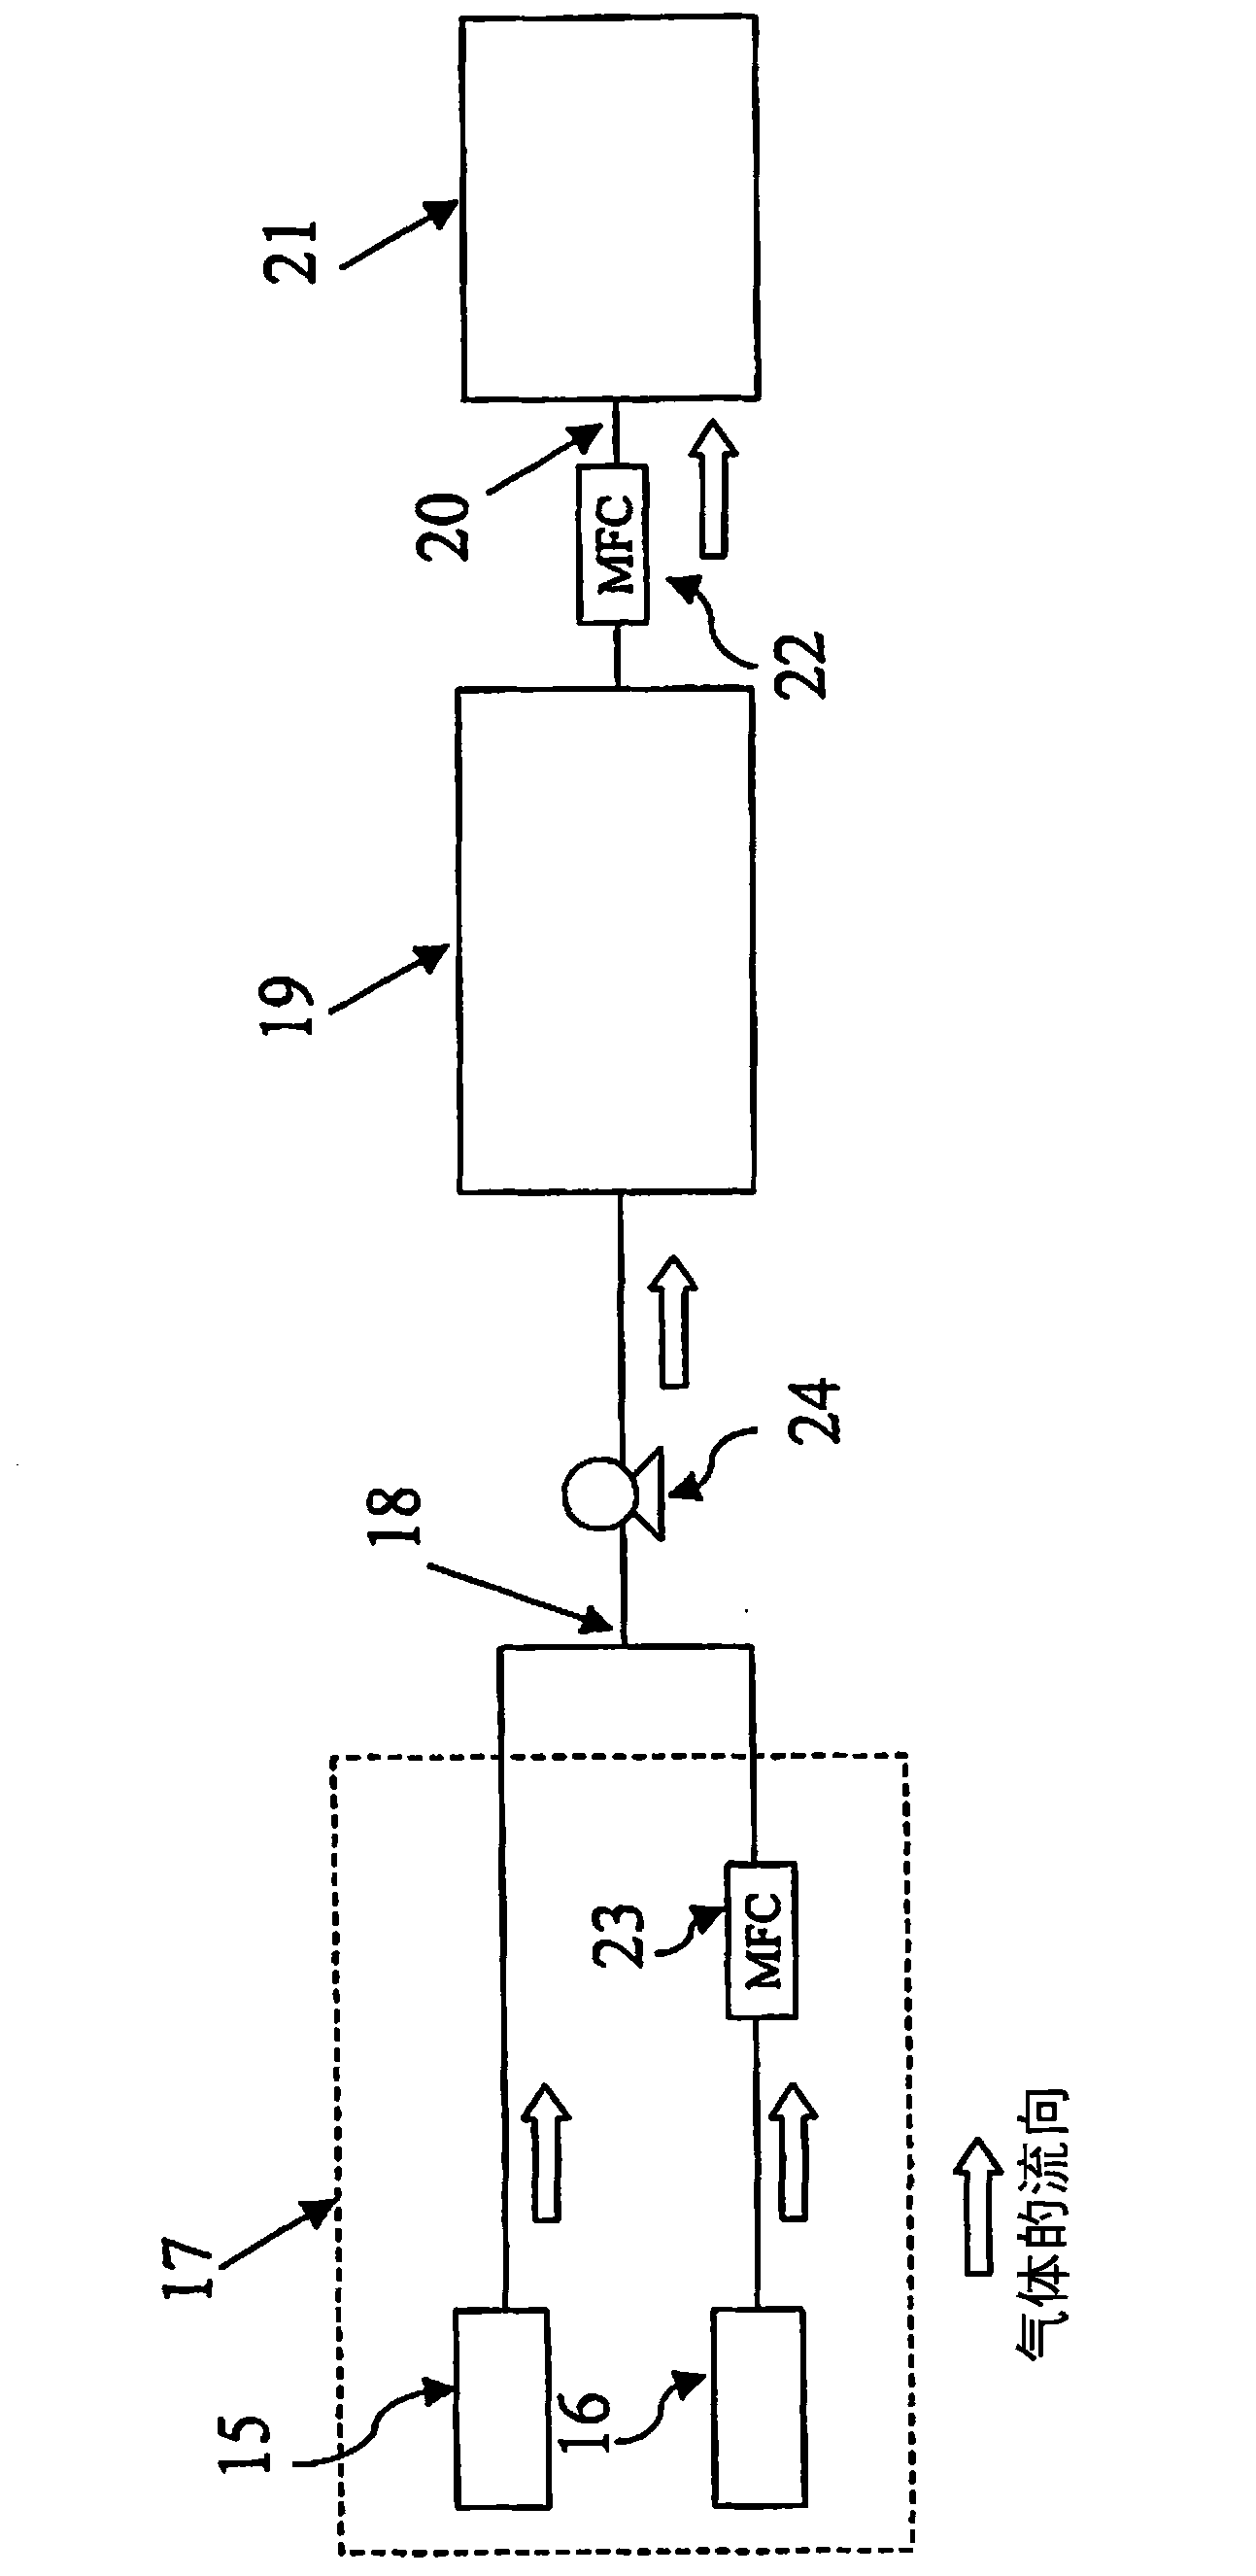 System for in-situ mixing and diluting fluorine gas